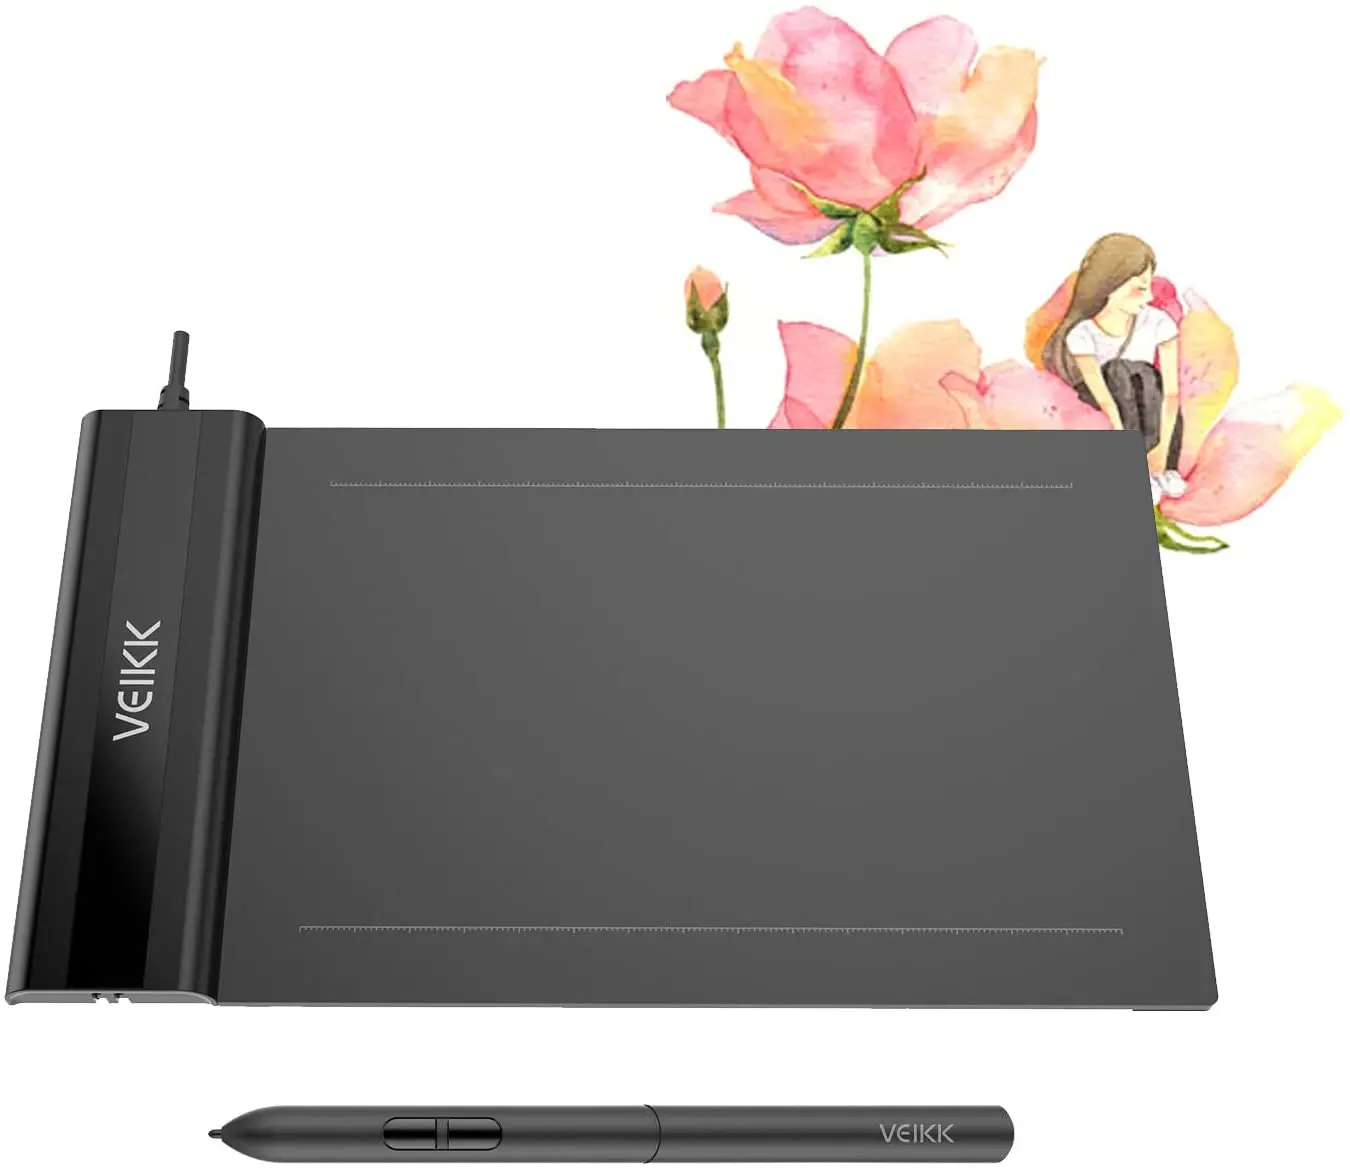 

VEIKK S640 6 x 4 Inch 8192 Levels Battery-free Pen Type-C Graphic Drawing Tablet For Windows,MAC And Android